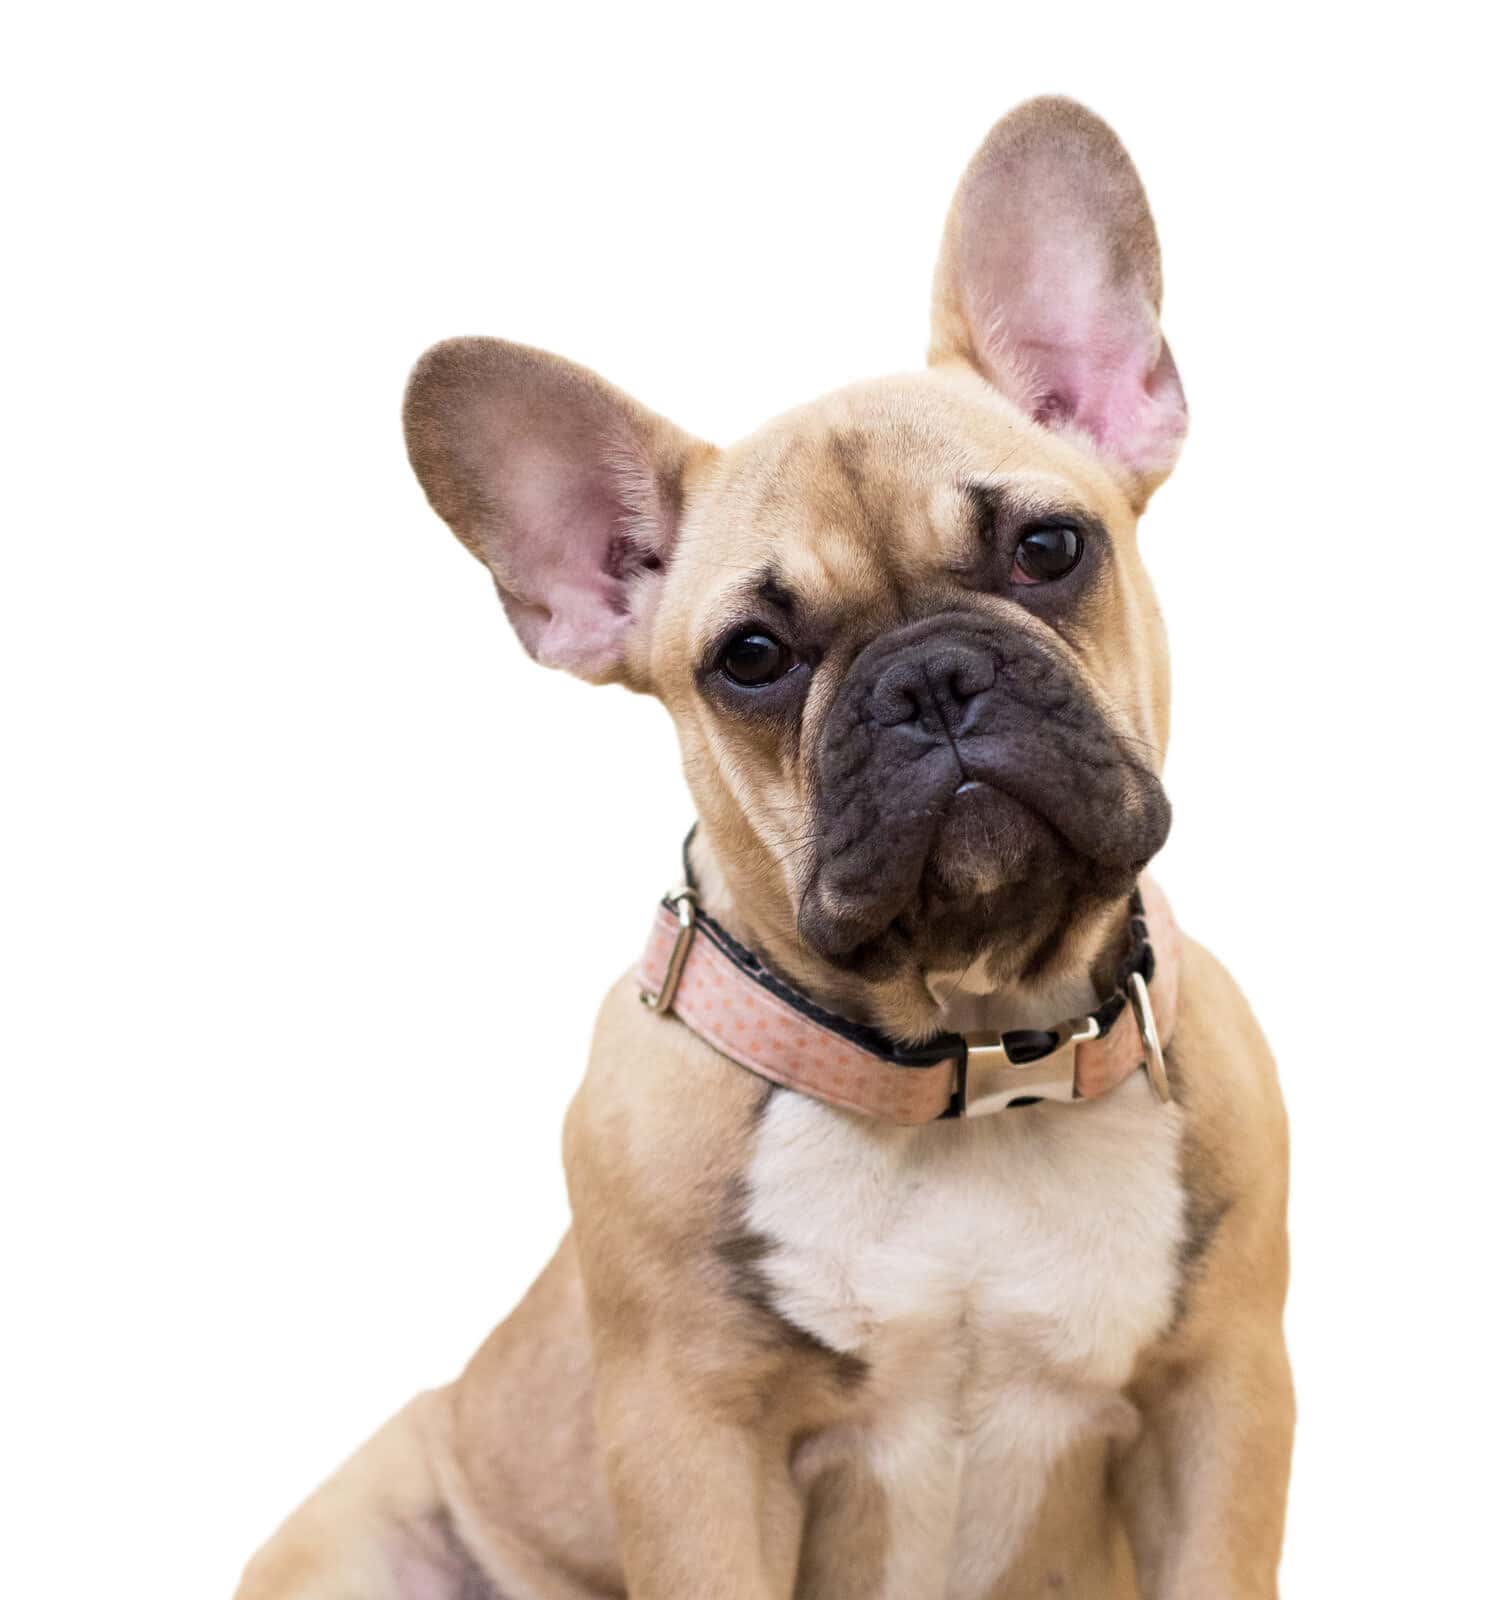 Fawn french bulldog puppy sitting white background isolate